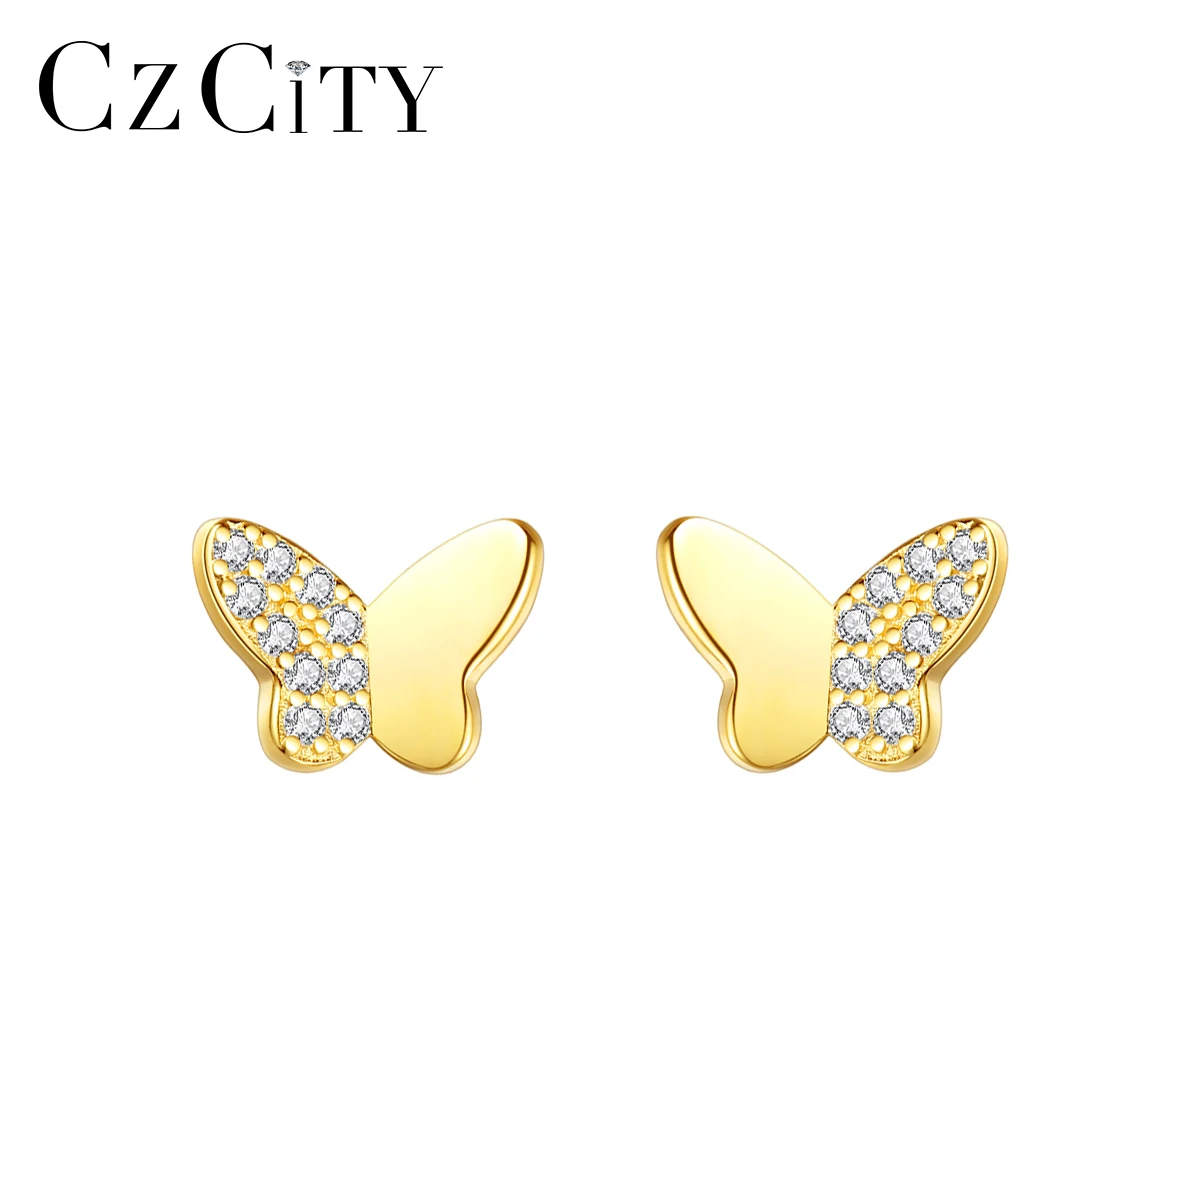 

CZCITY Small Earring Charm Jewelry Minimal Gold Stud Sterling Silver 925 Fashion Earing Butterfly